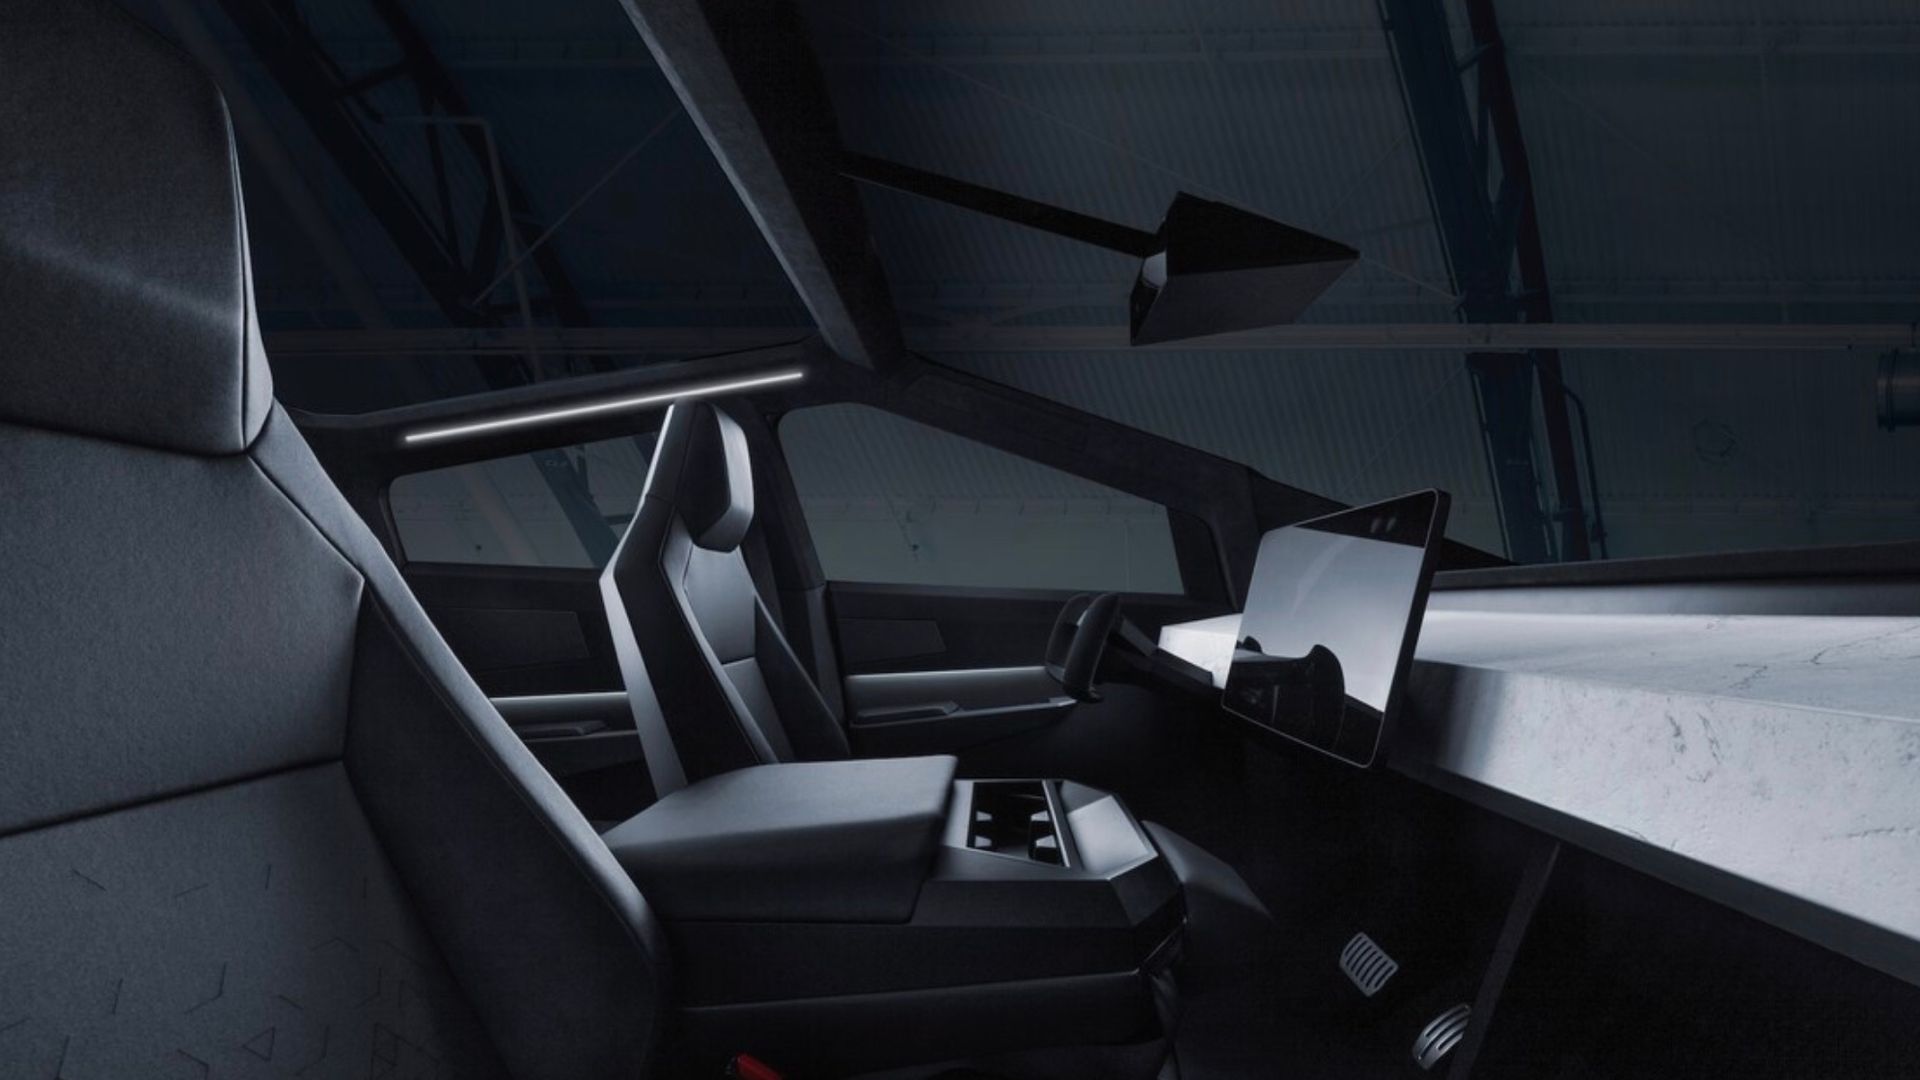 Cybertruck interior and glass roof